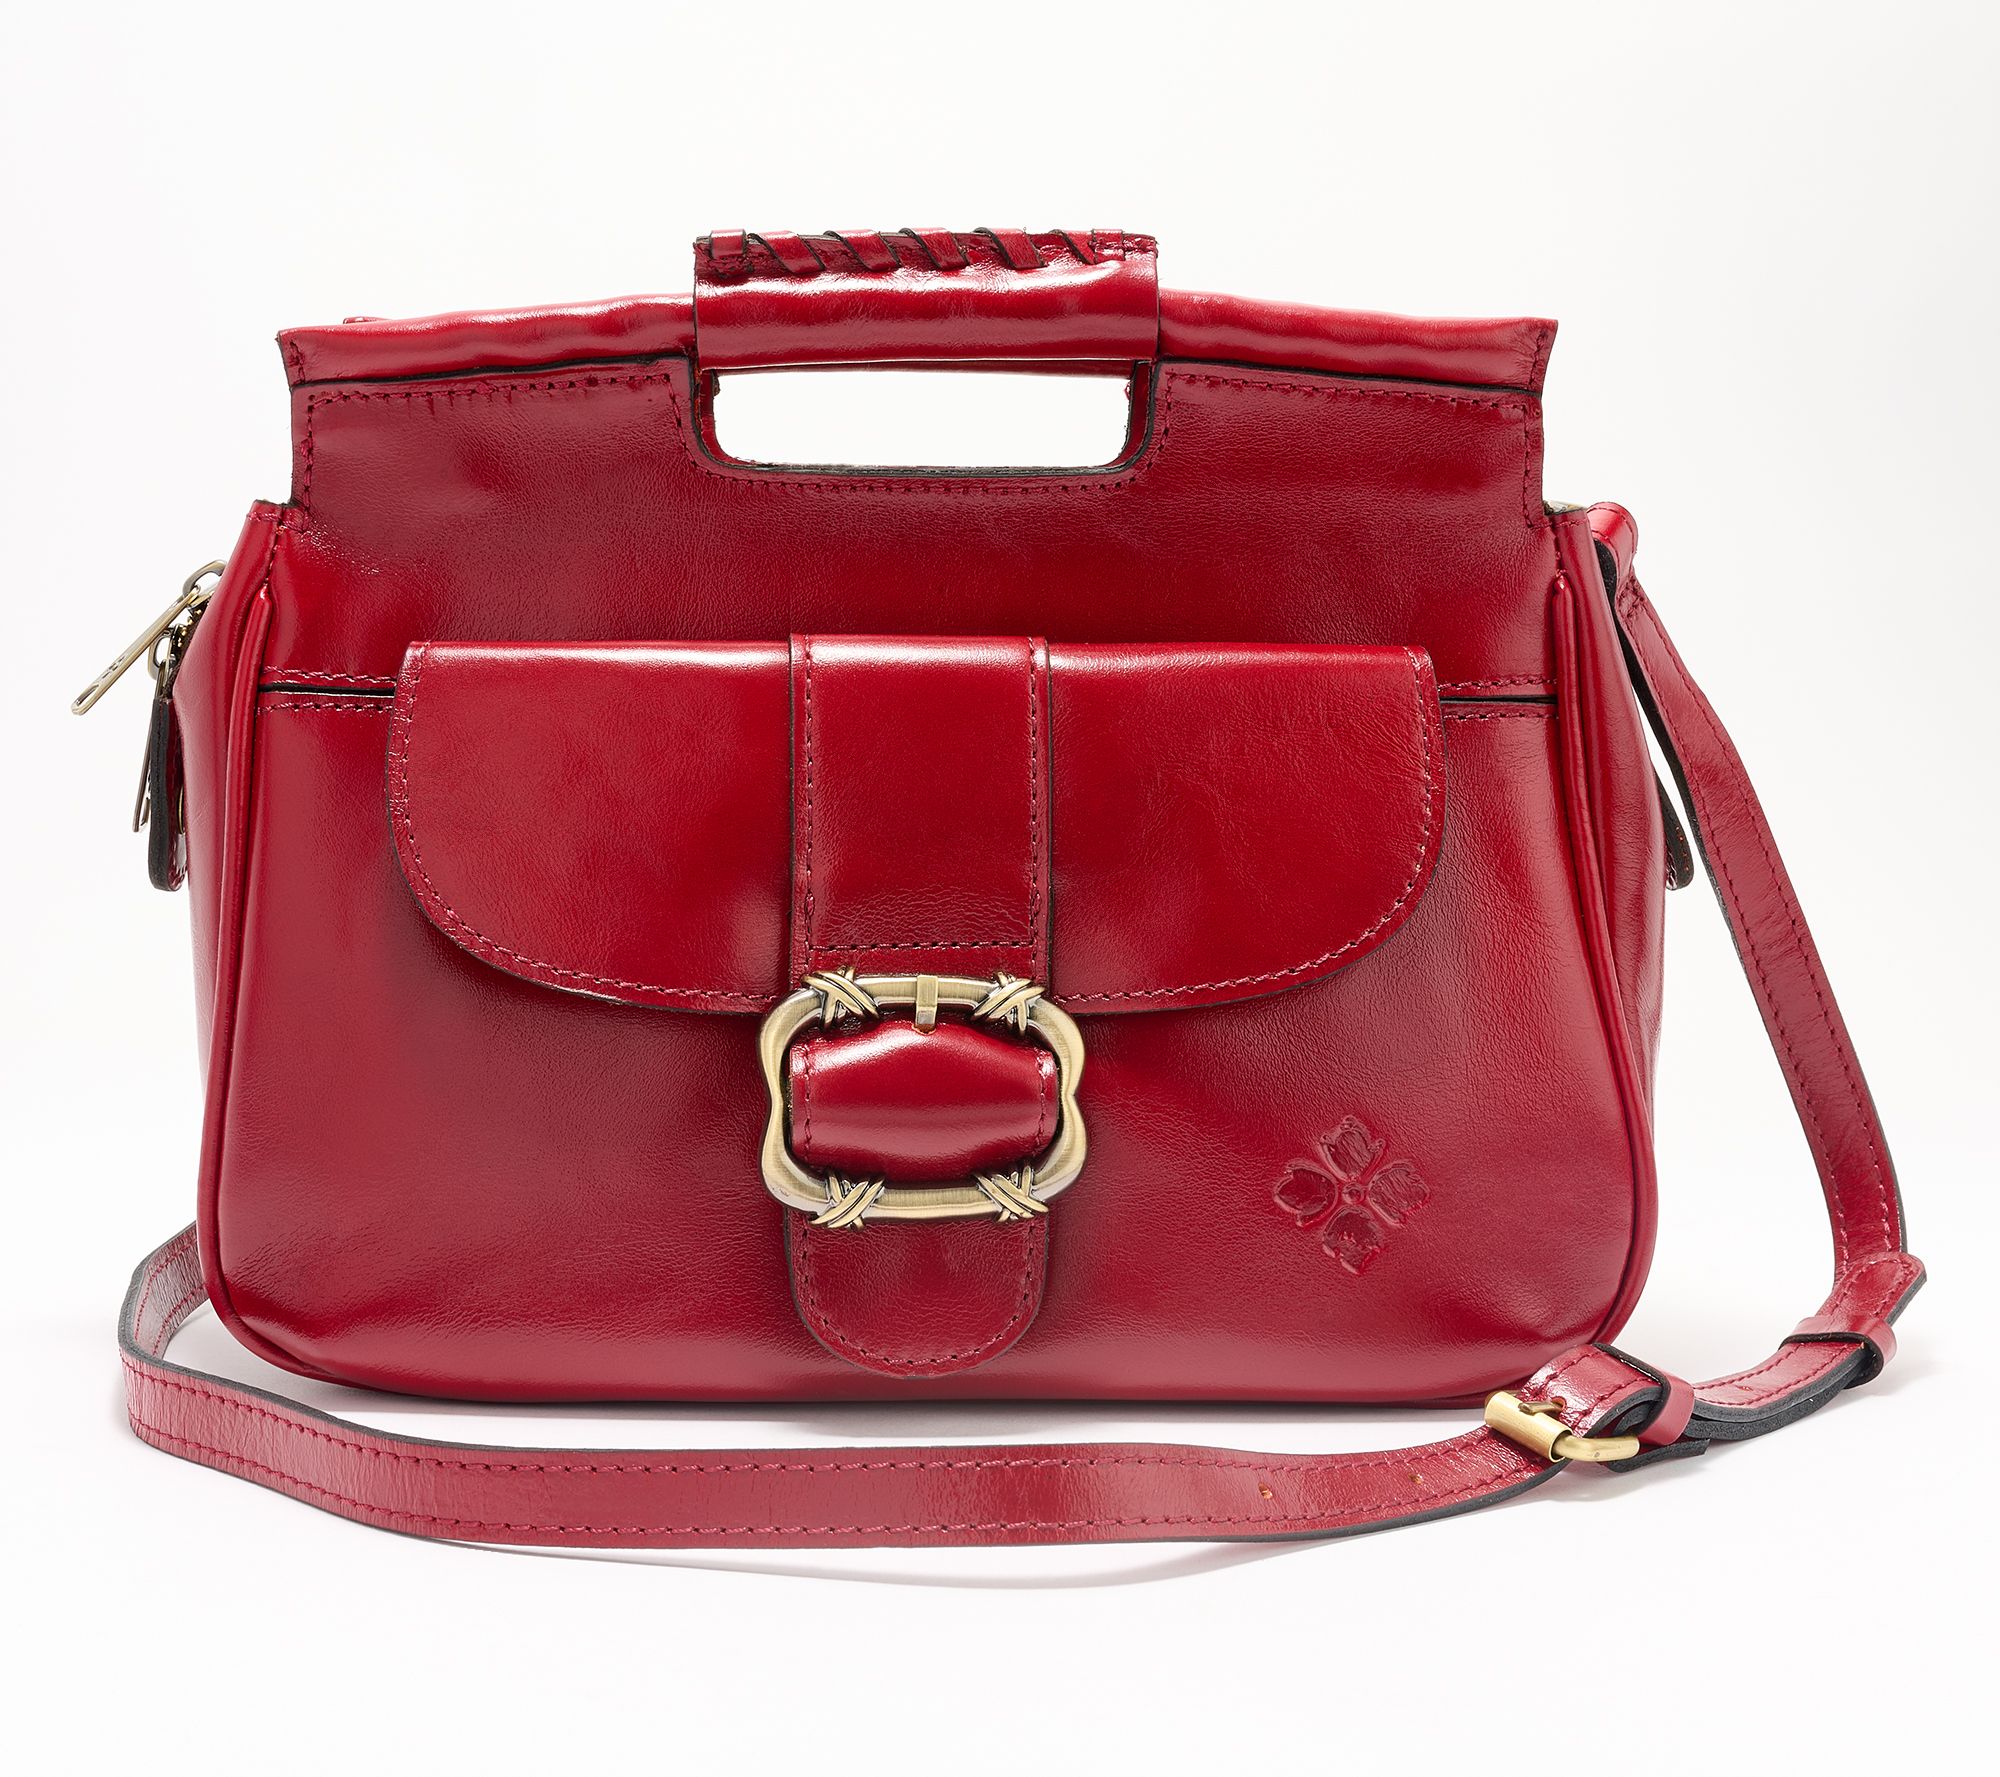 New Bright Leather Handbag With Large Bow And One-shoulder Crossbody Bag